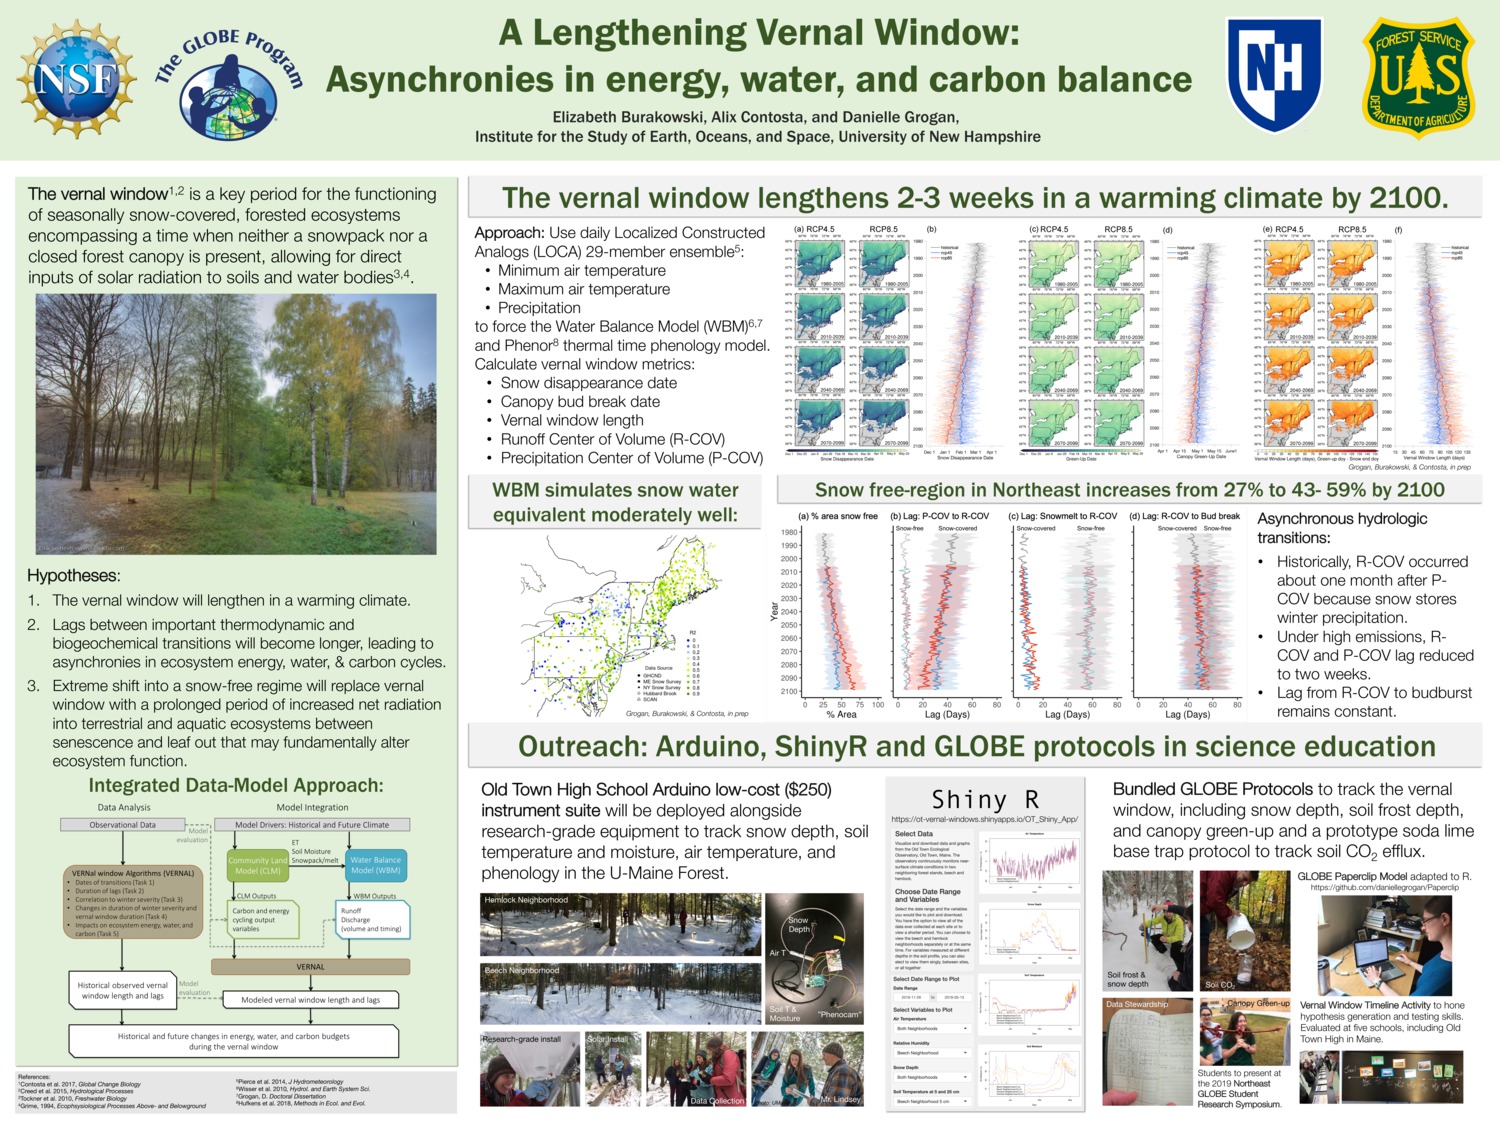 A Lengthening Vernal Window: Asynchronies In Energy, Water, And Carbon Balance by eaburakowski